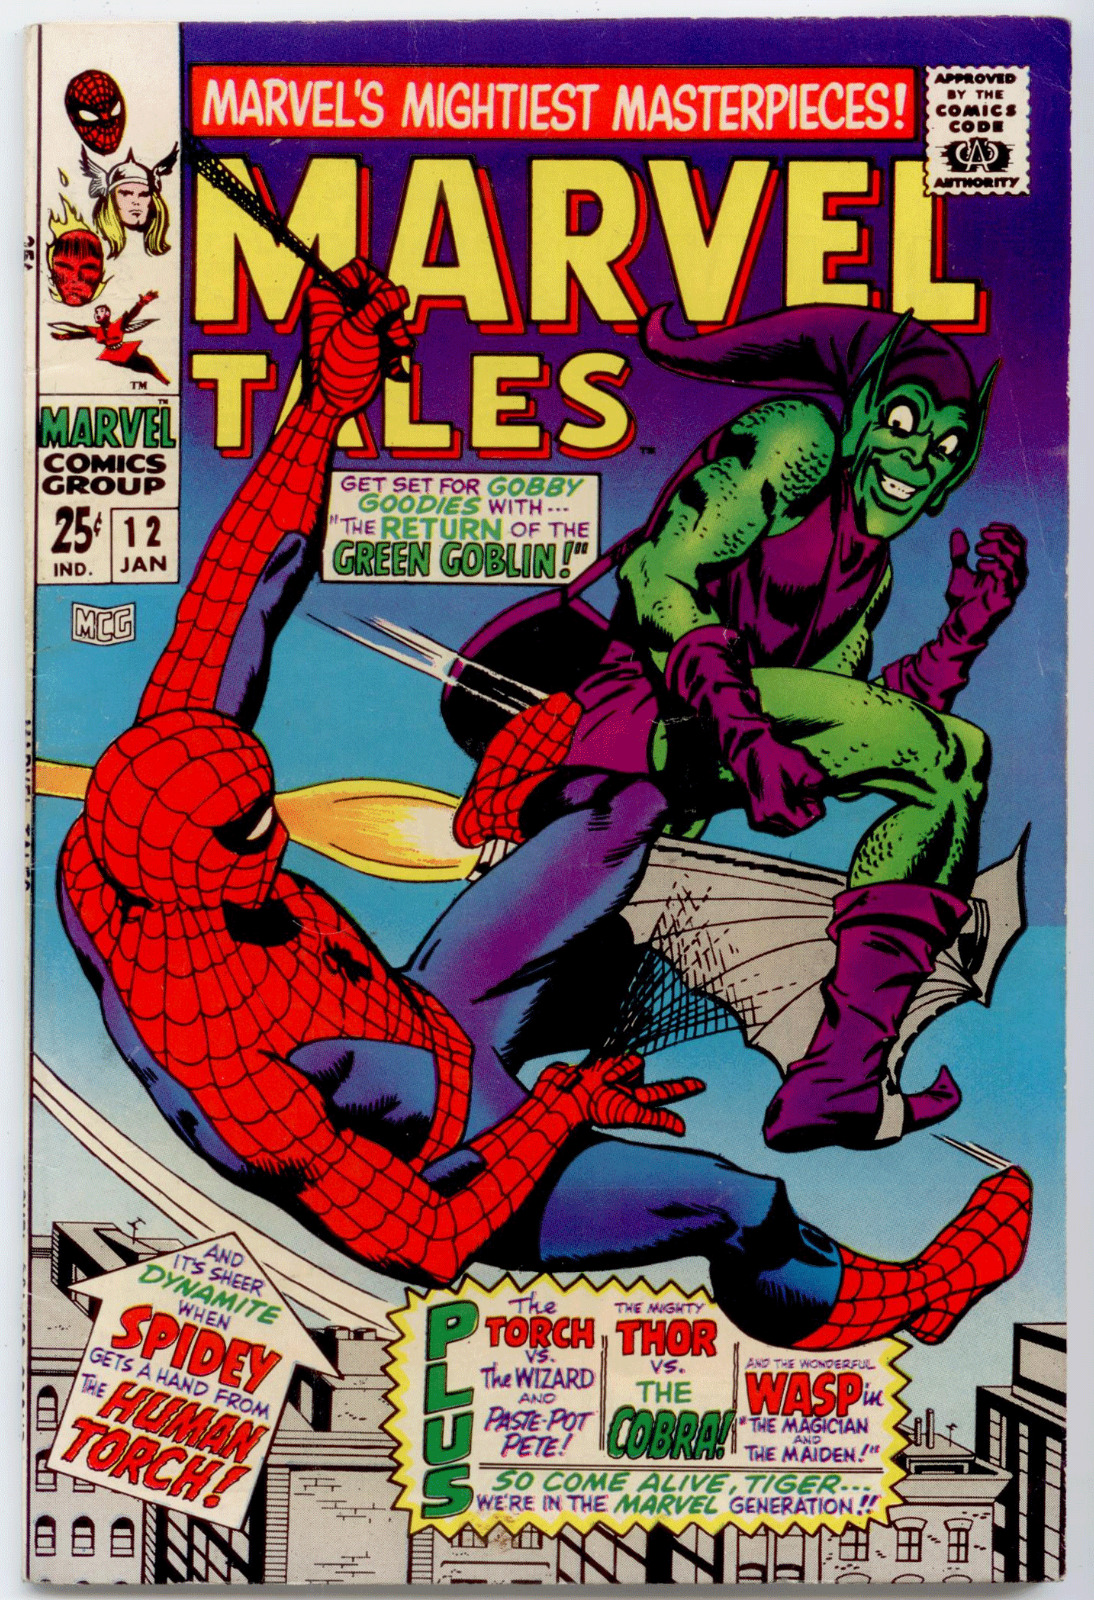 Marvel Tales #12 VF- 7.5 reprint Amazing Spider-Man #17 2nd Green Goblin, more